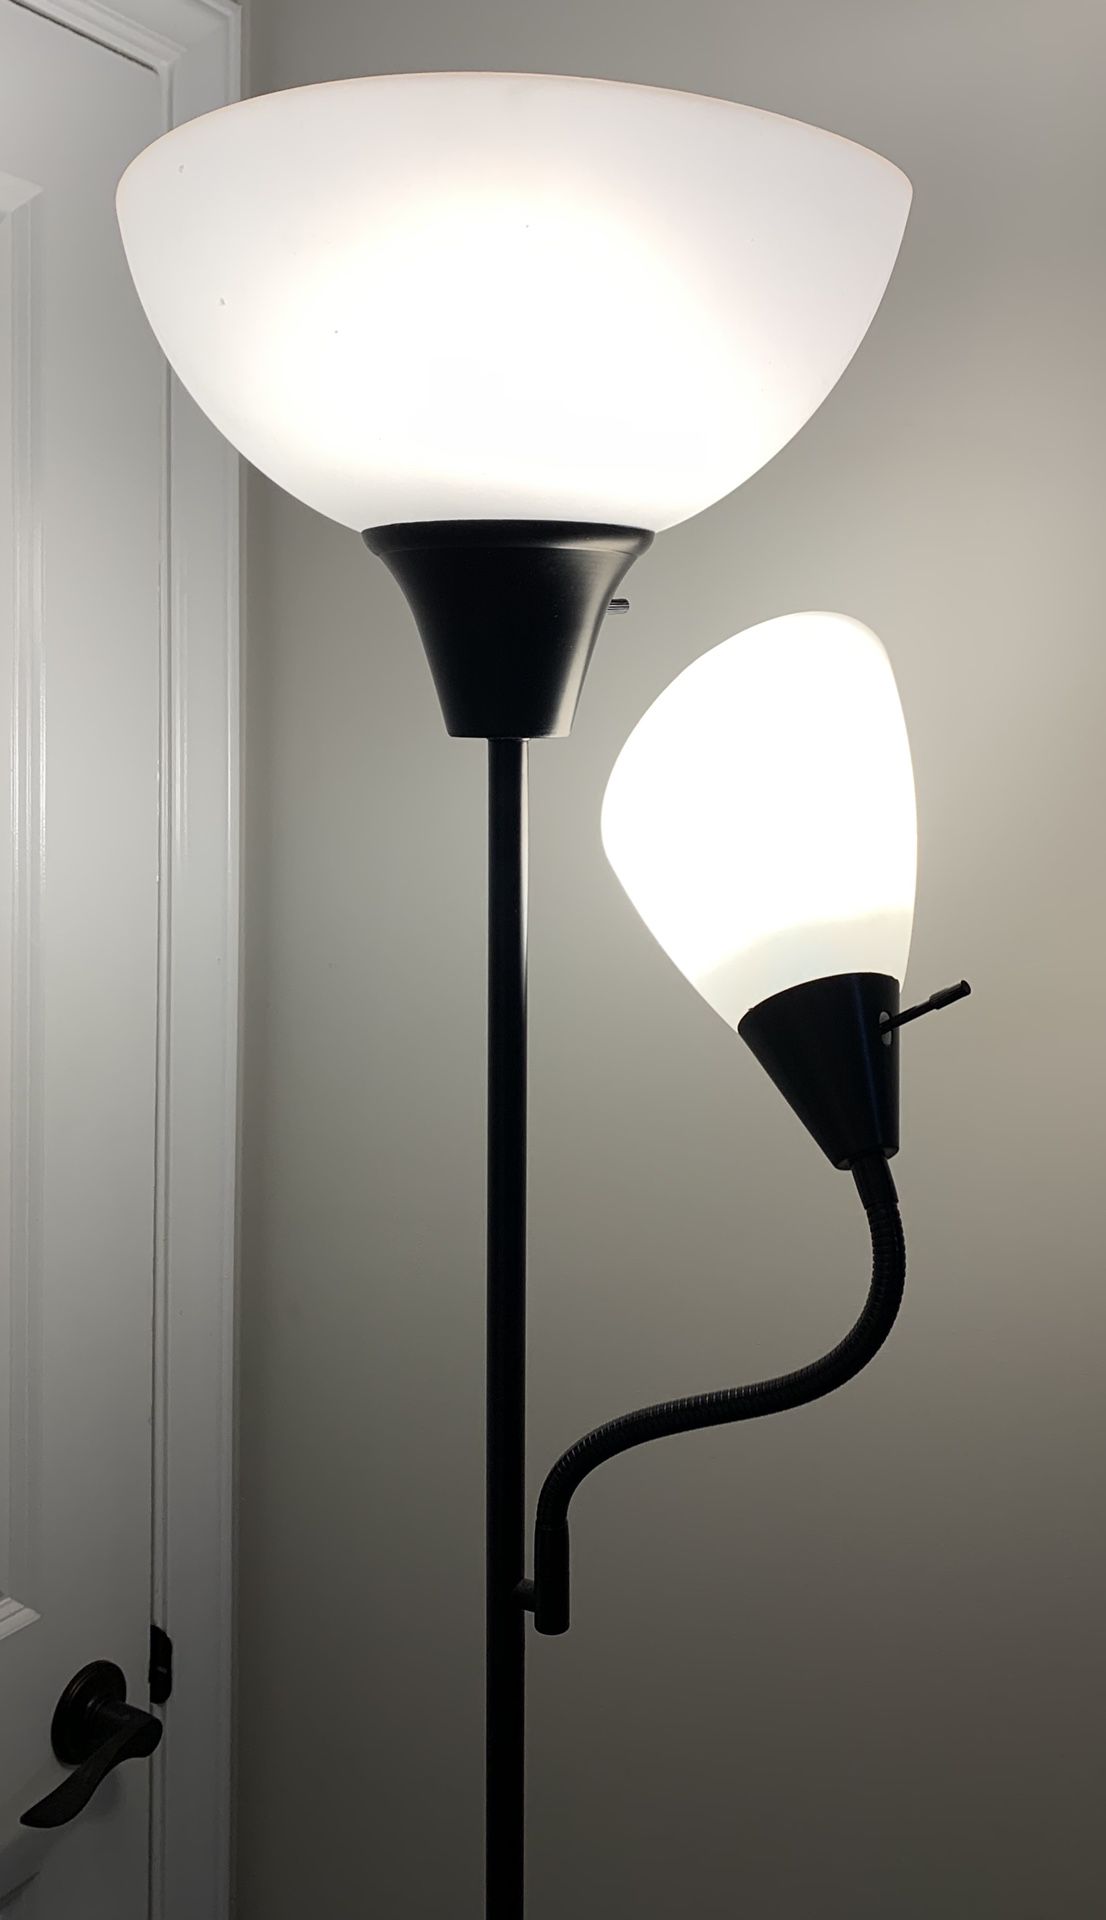 71” Tall Black Metal Working Torchiere Floor Standing Lamp With Reading Light